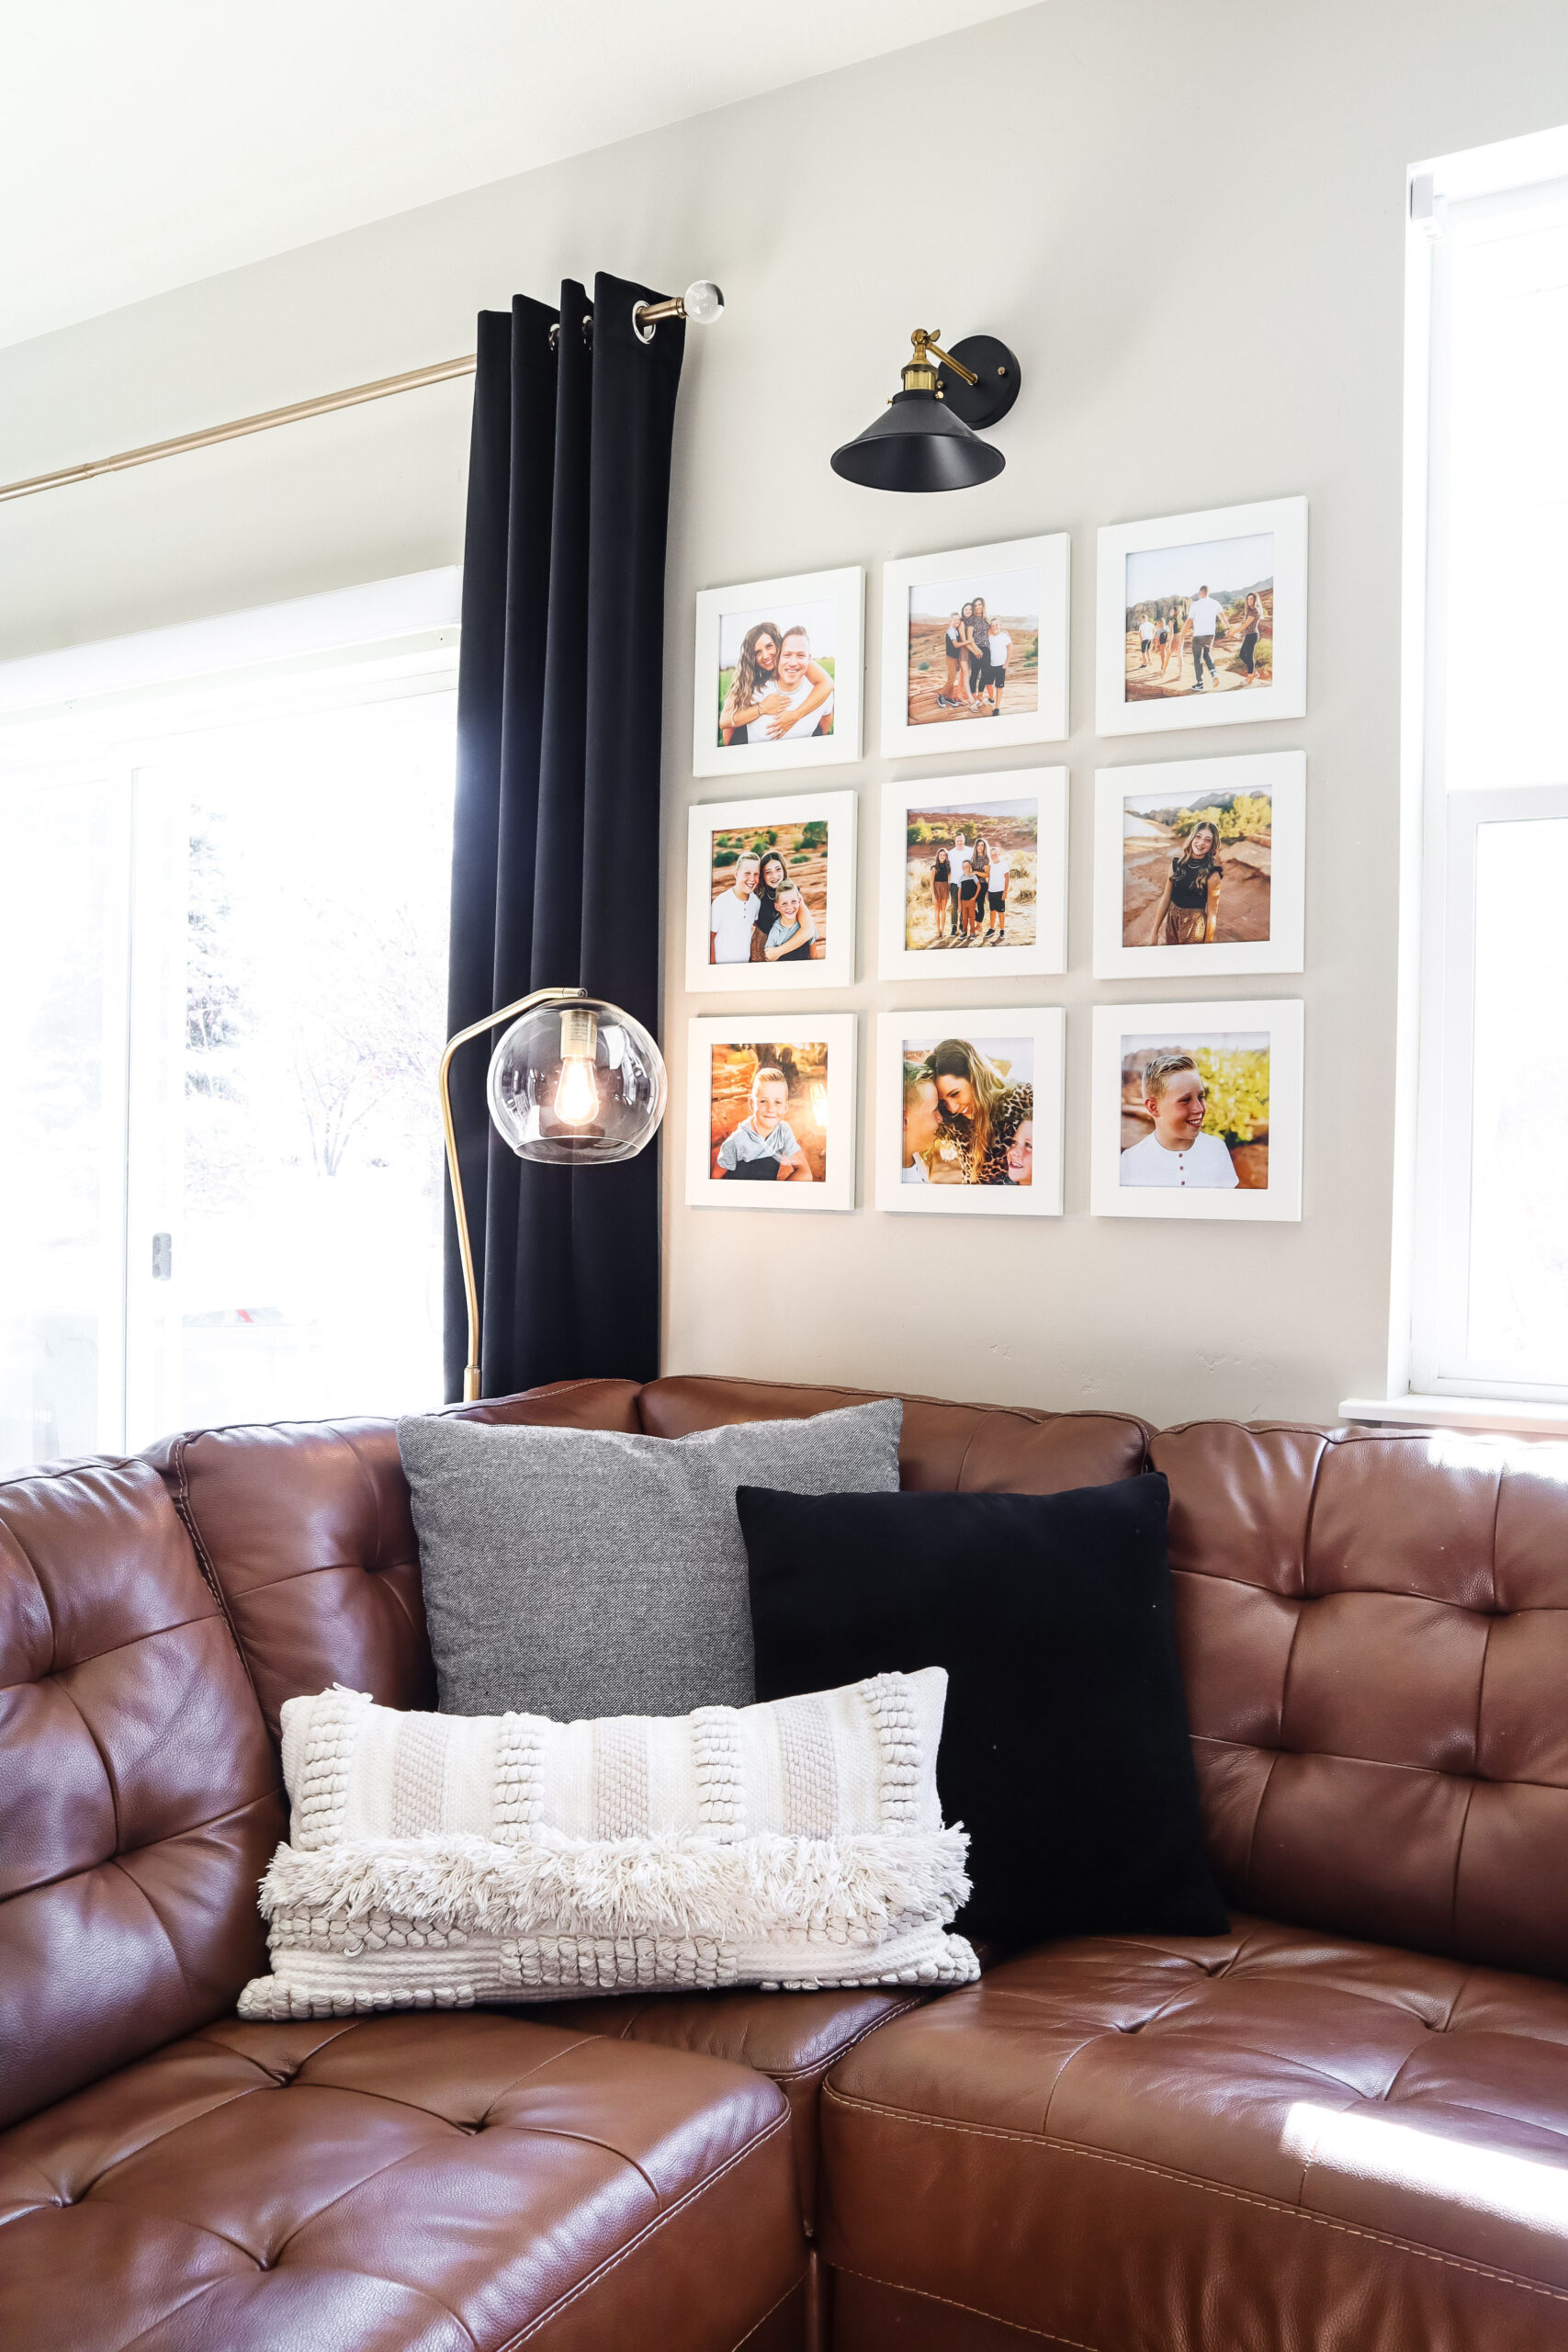 20 Ways to Make Your Home Cozy